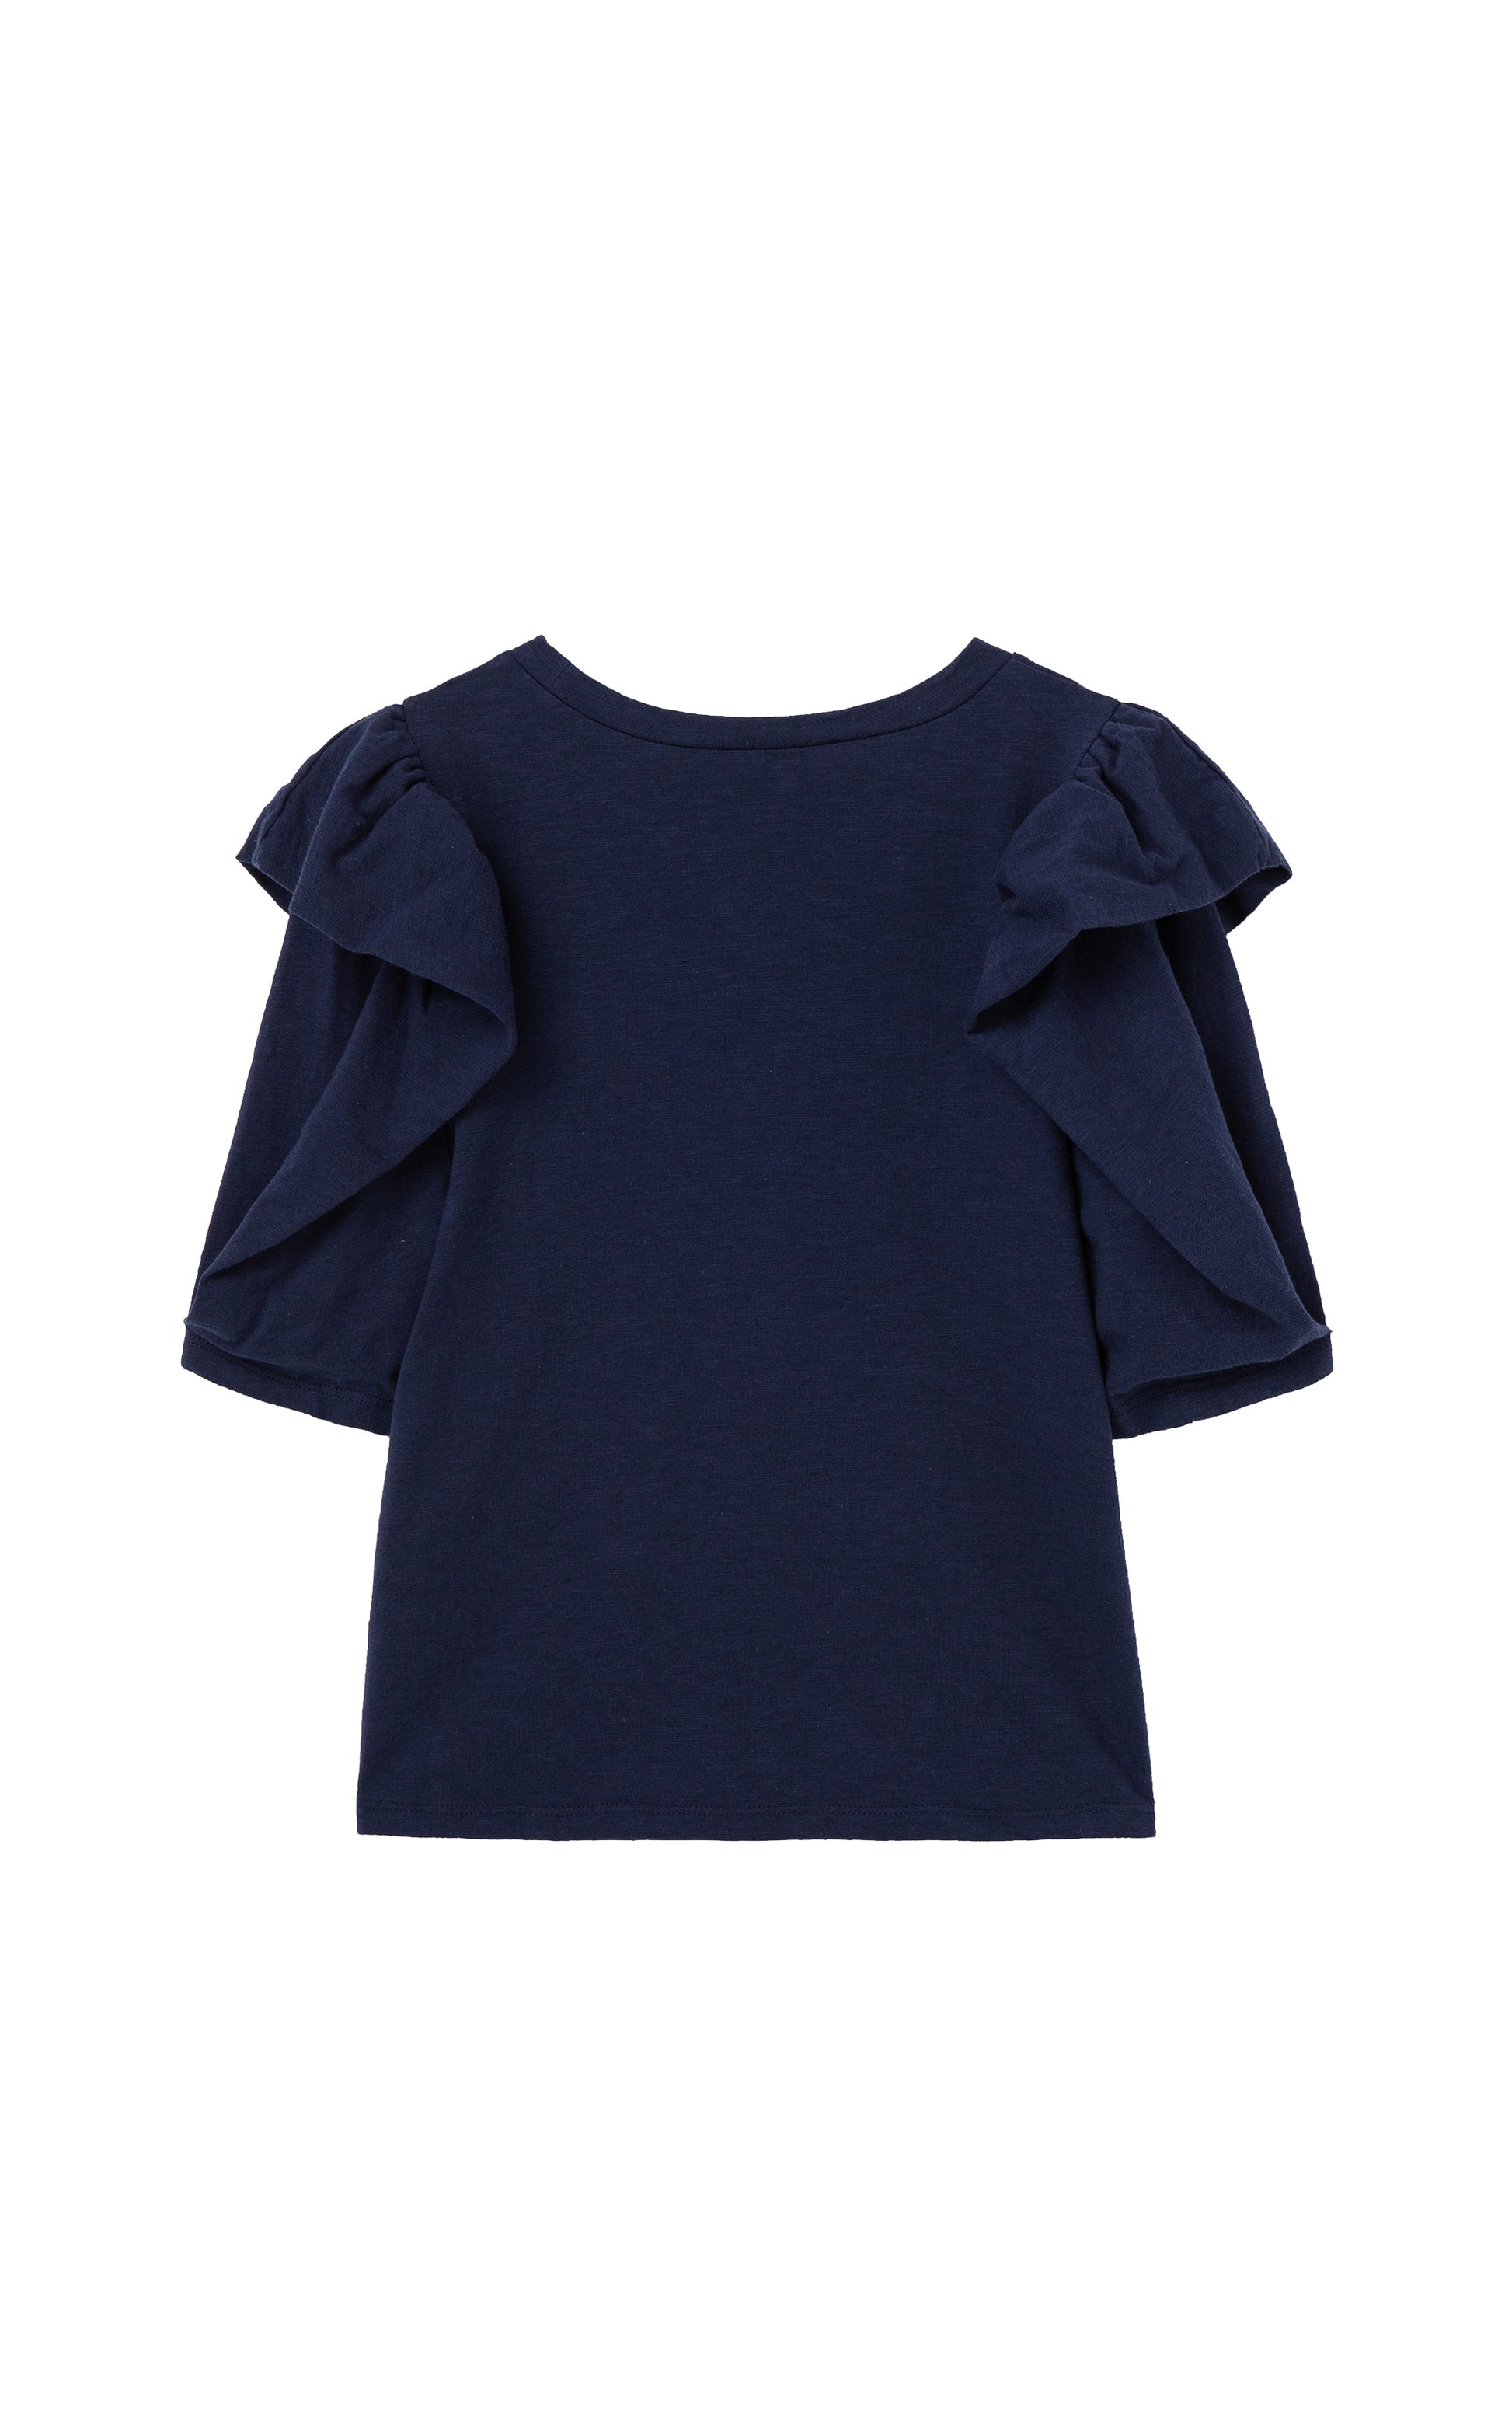 Back View Navy blue Top with Large sleeve ruffle 